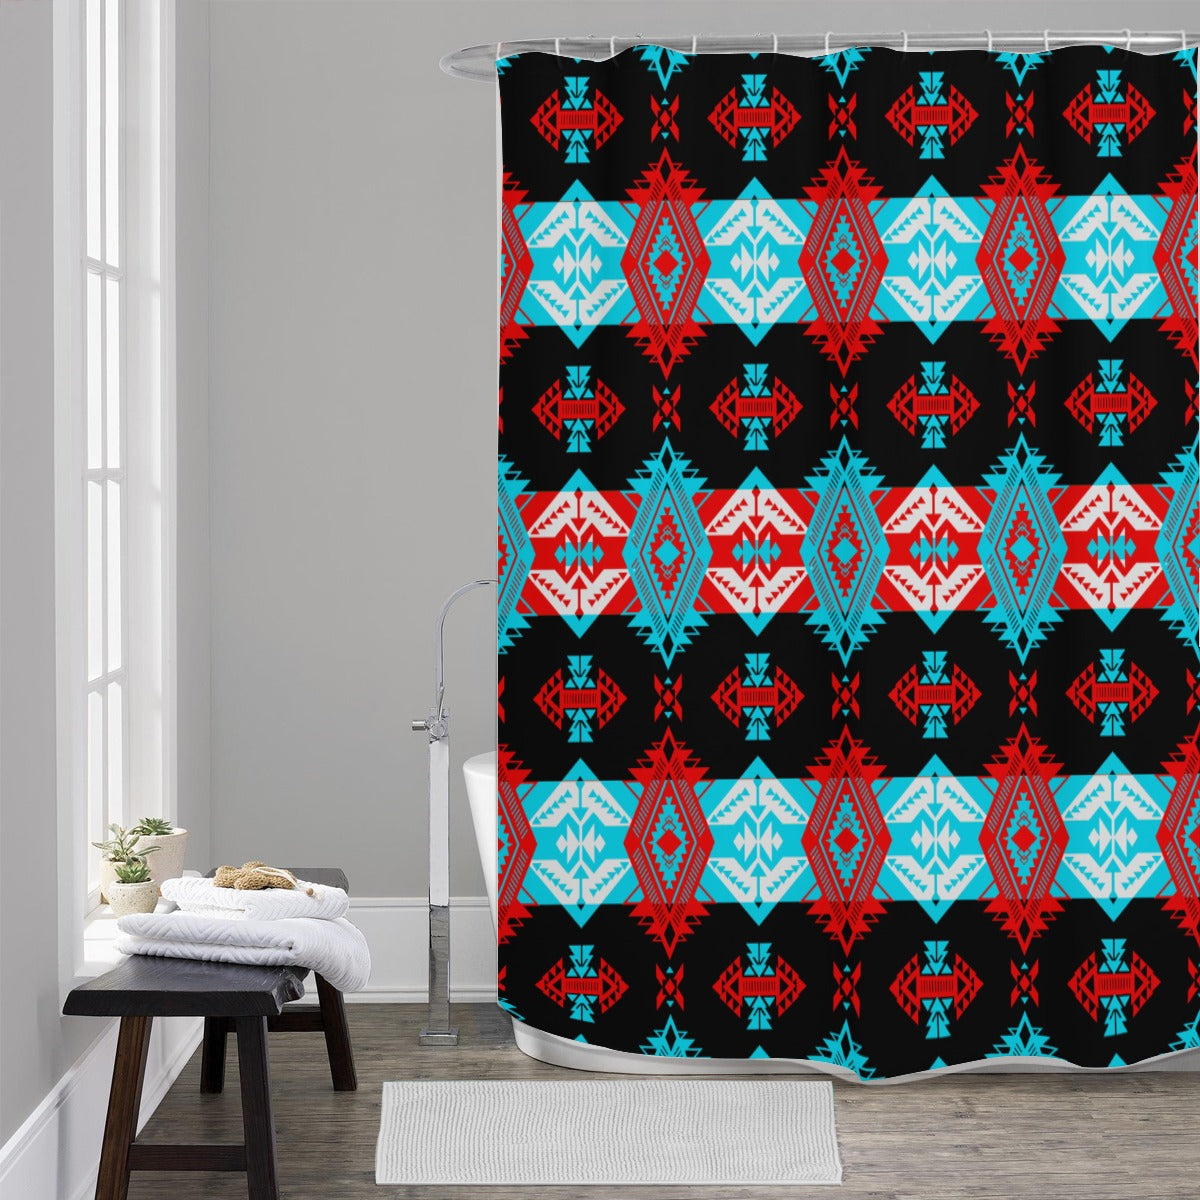 Sovereign Nation Trade Shower Curtain (59 inch x 71 inch)